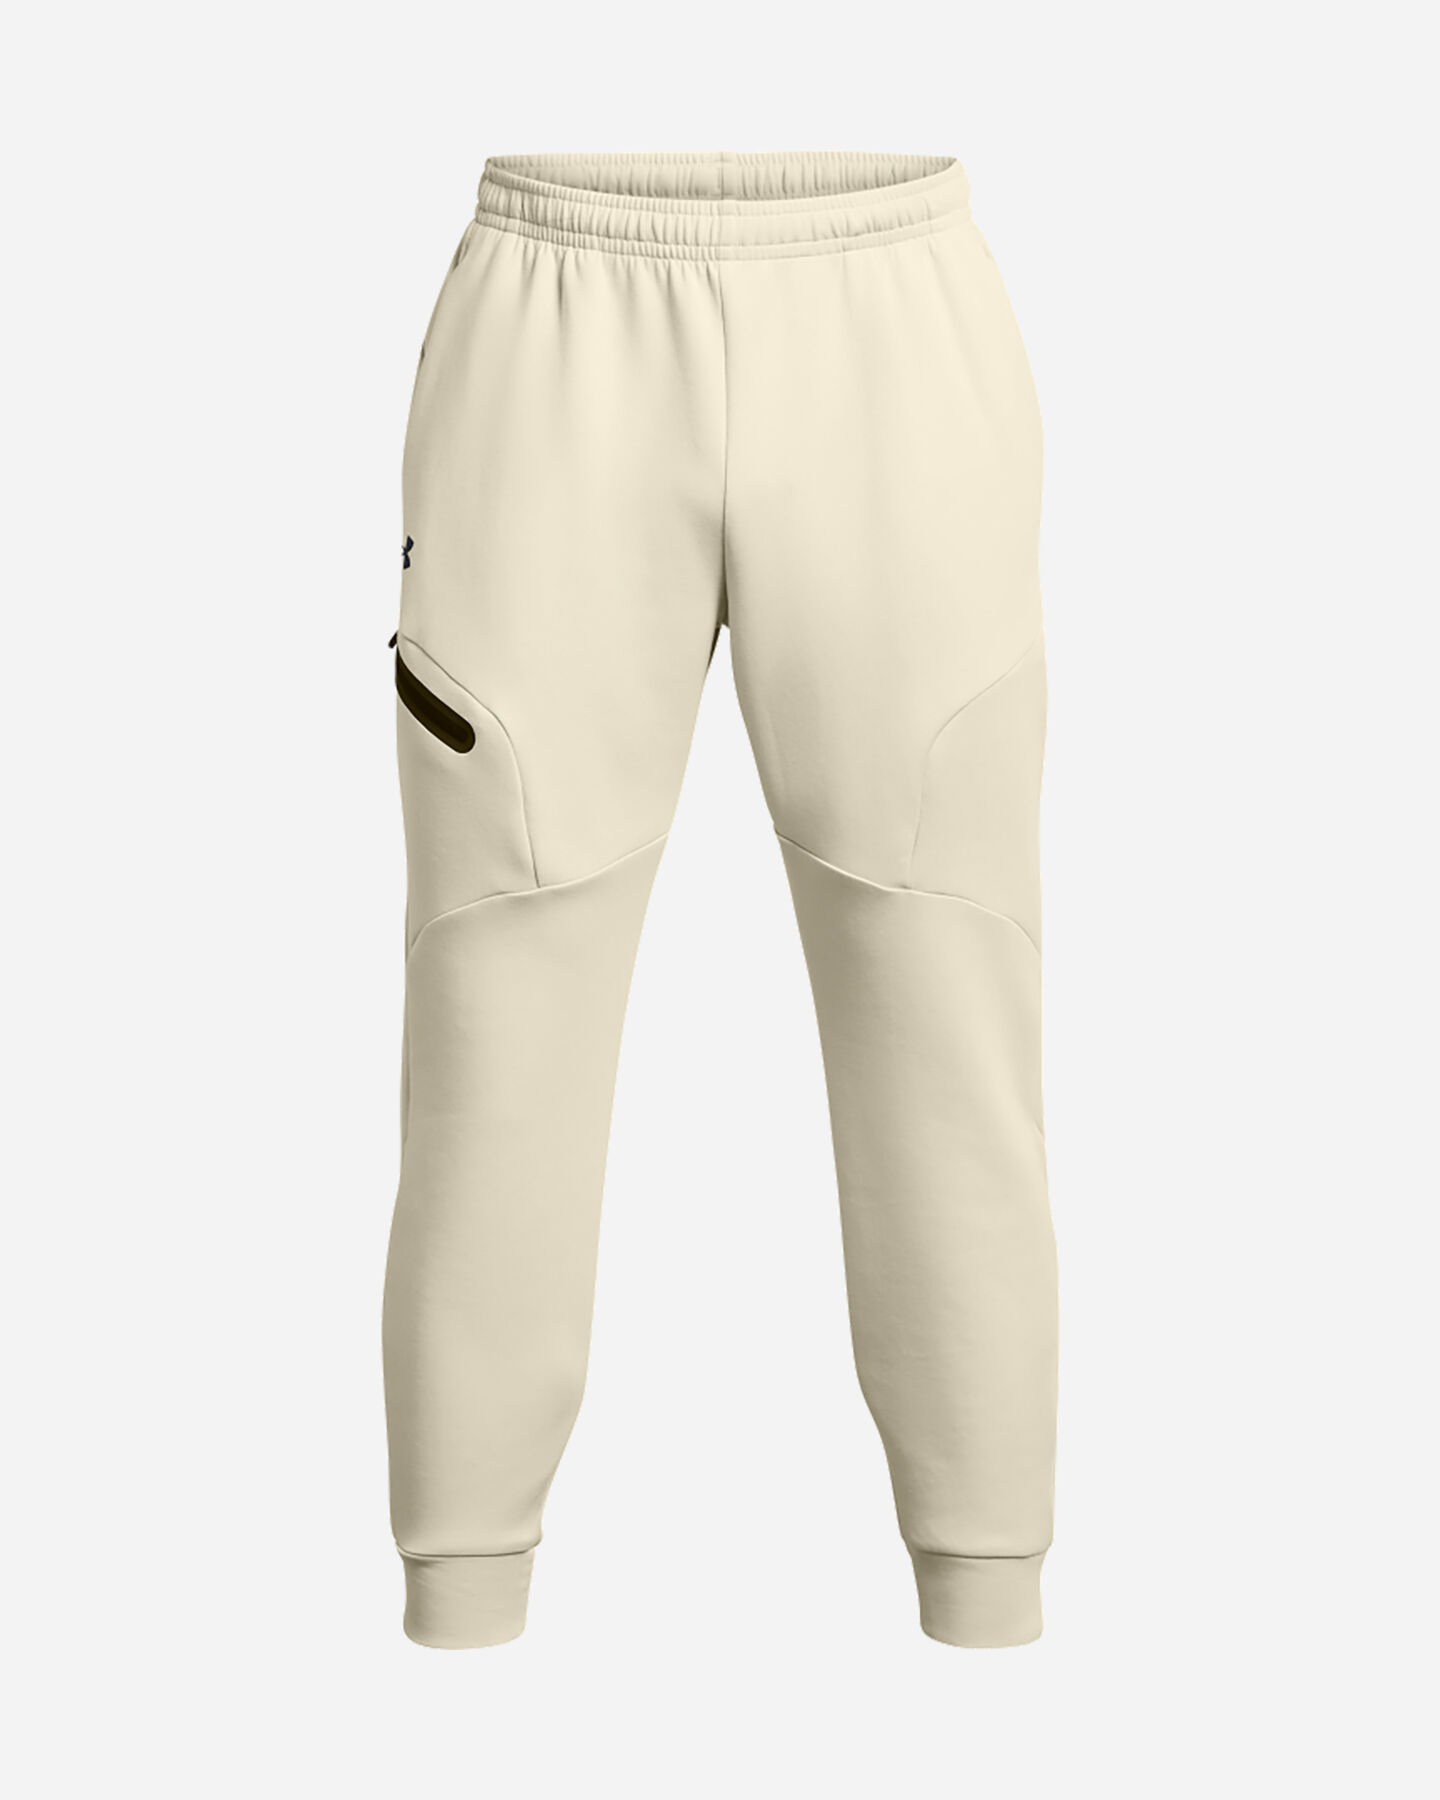  Pantalone UNDER ARMOUR UNSTOPPABLE M S5641304|0273|SM scatto 0